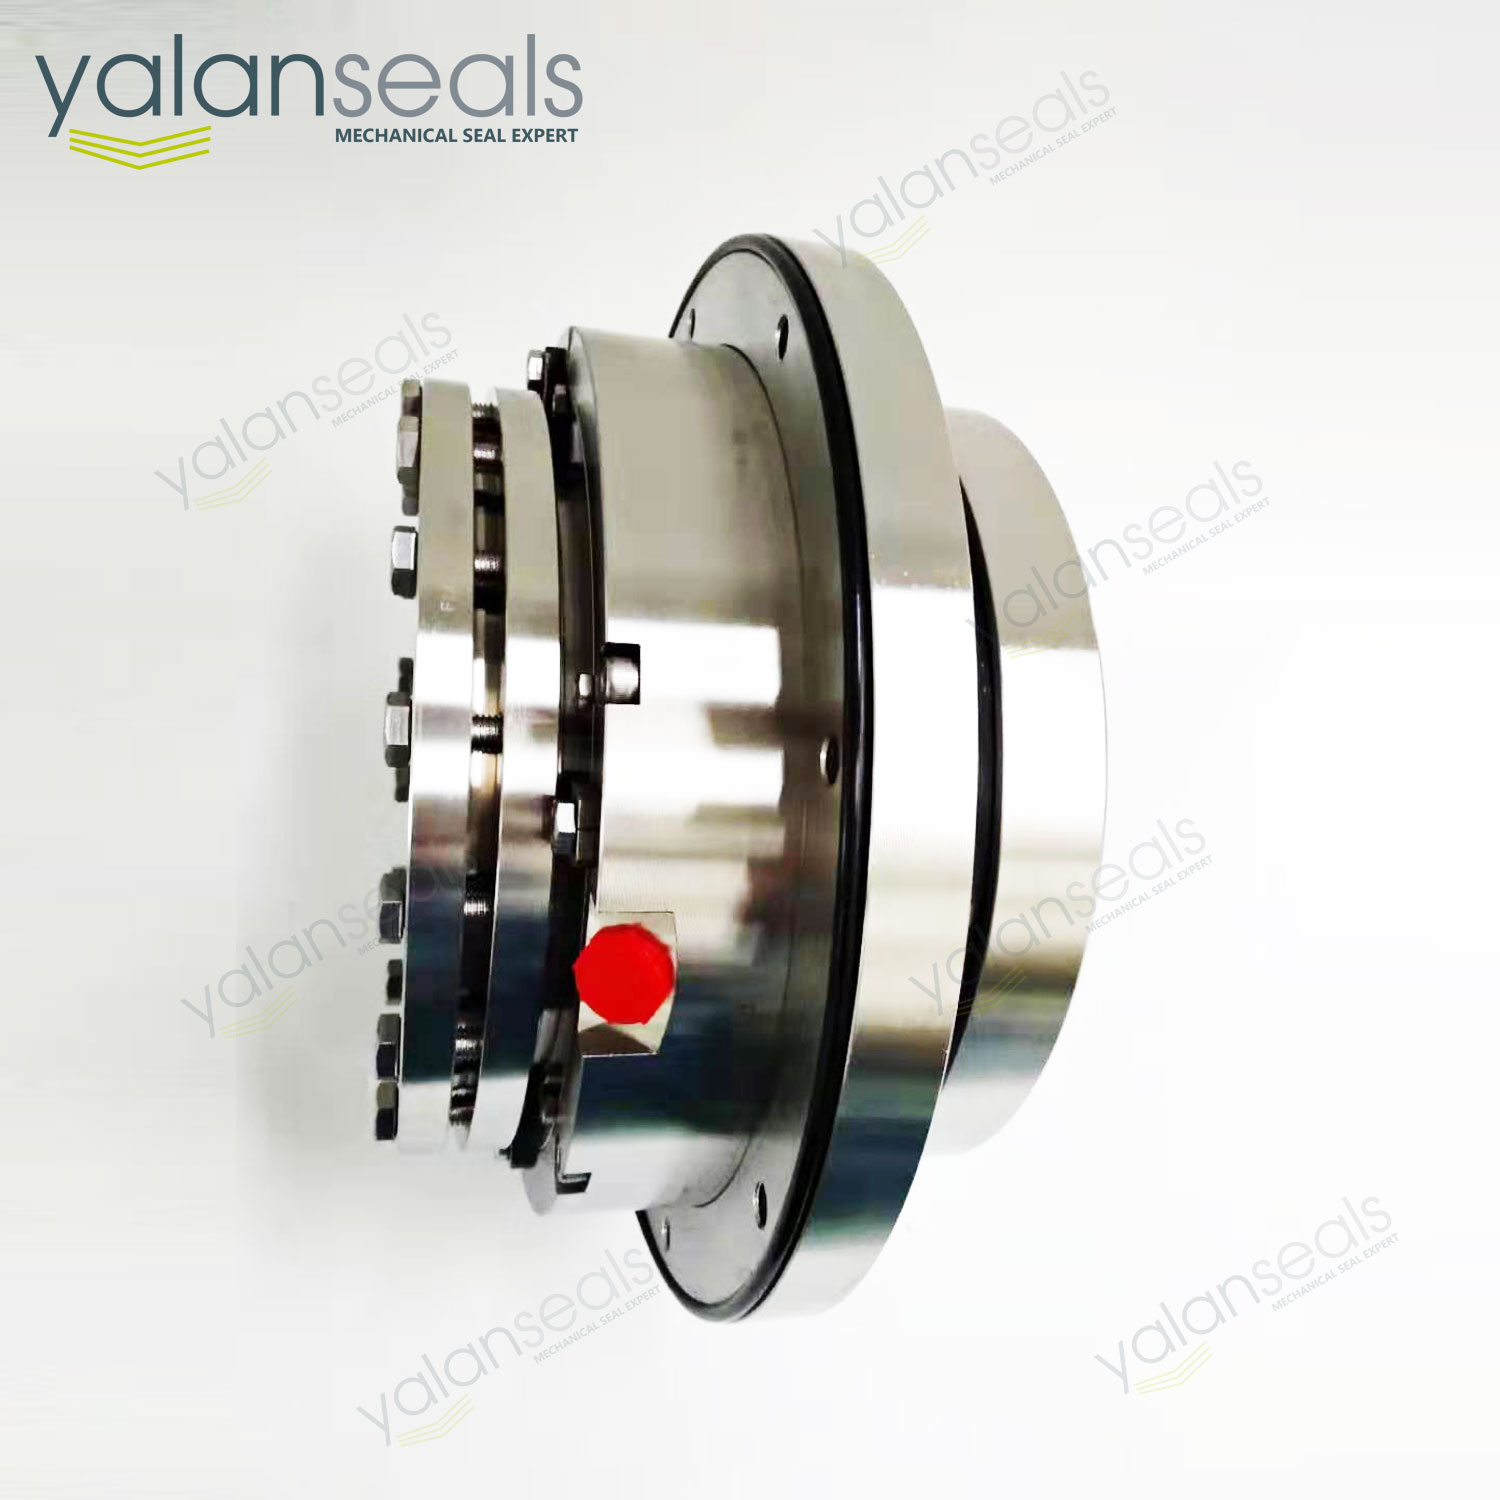 YALAN TL3-S1 Single Cartridge Mechanical Seal for Slurry Pumps and Pulp Pumps